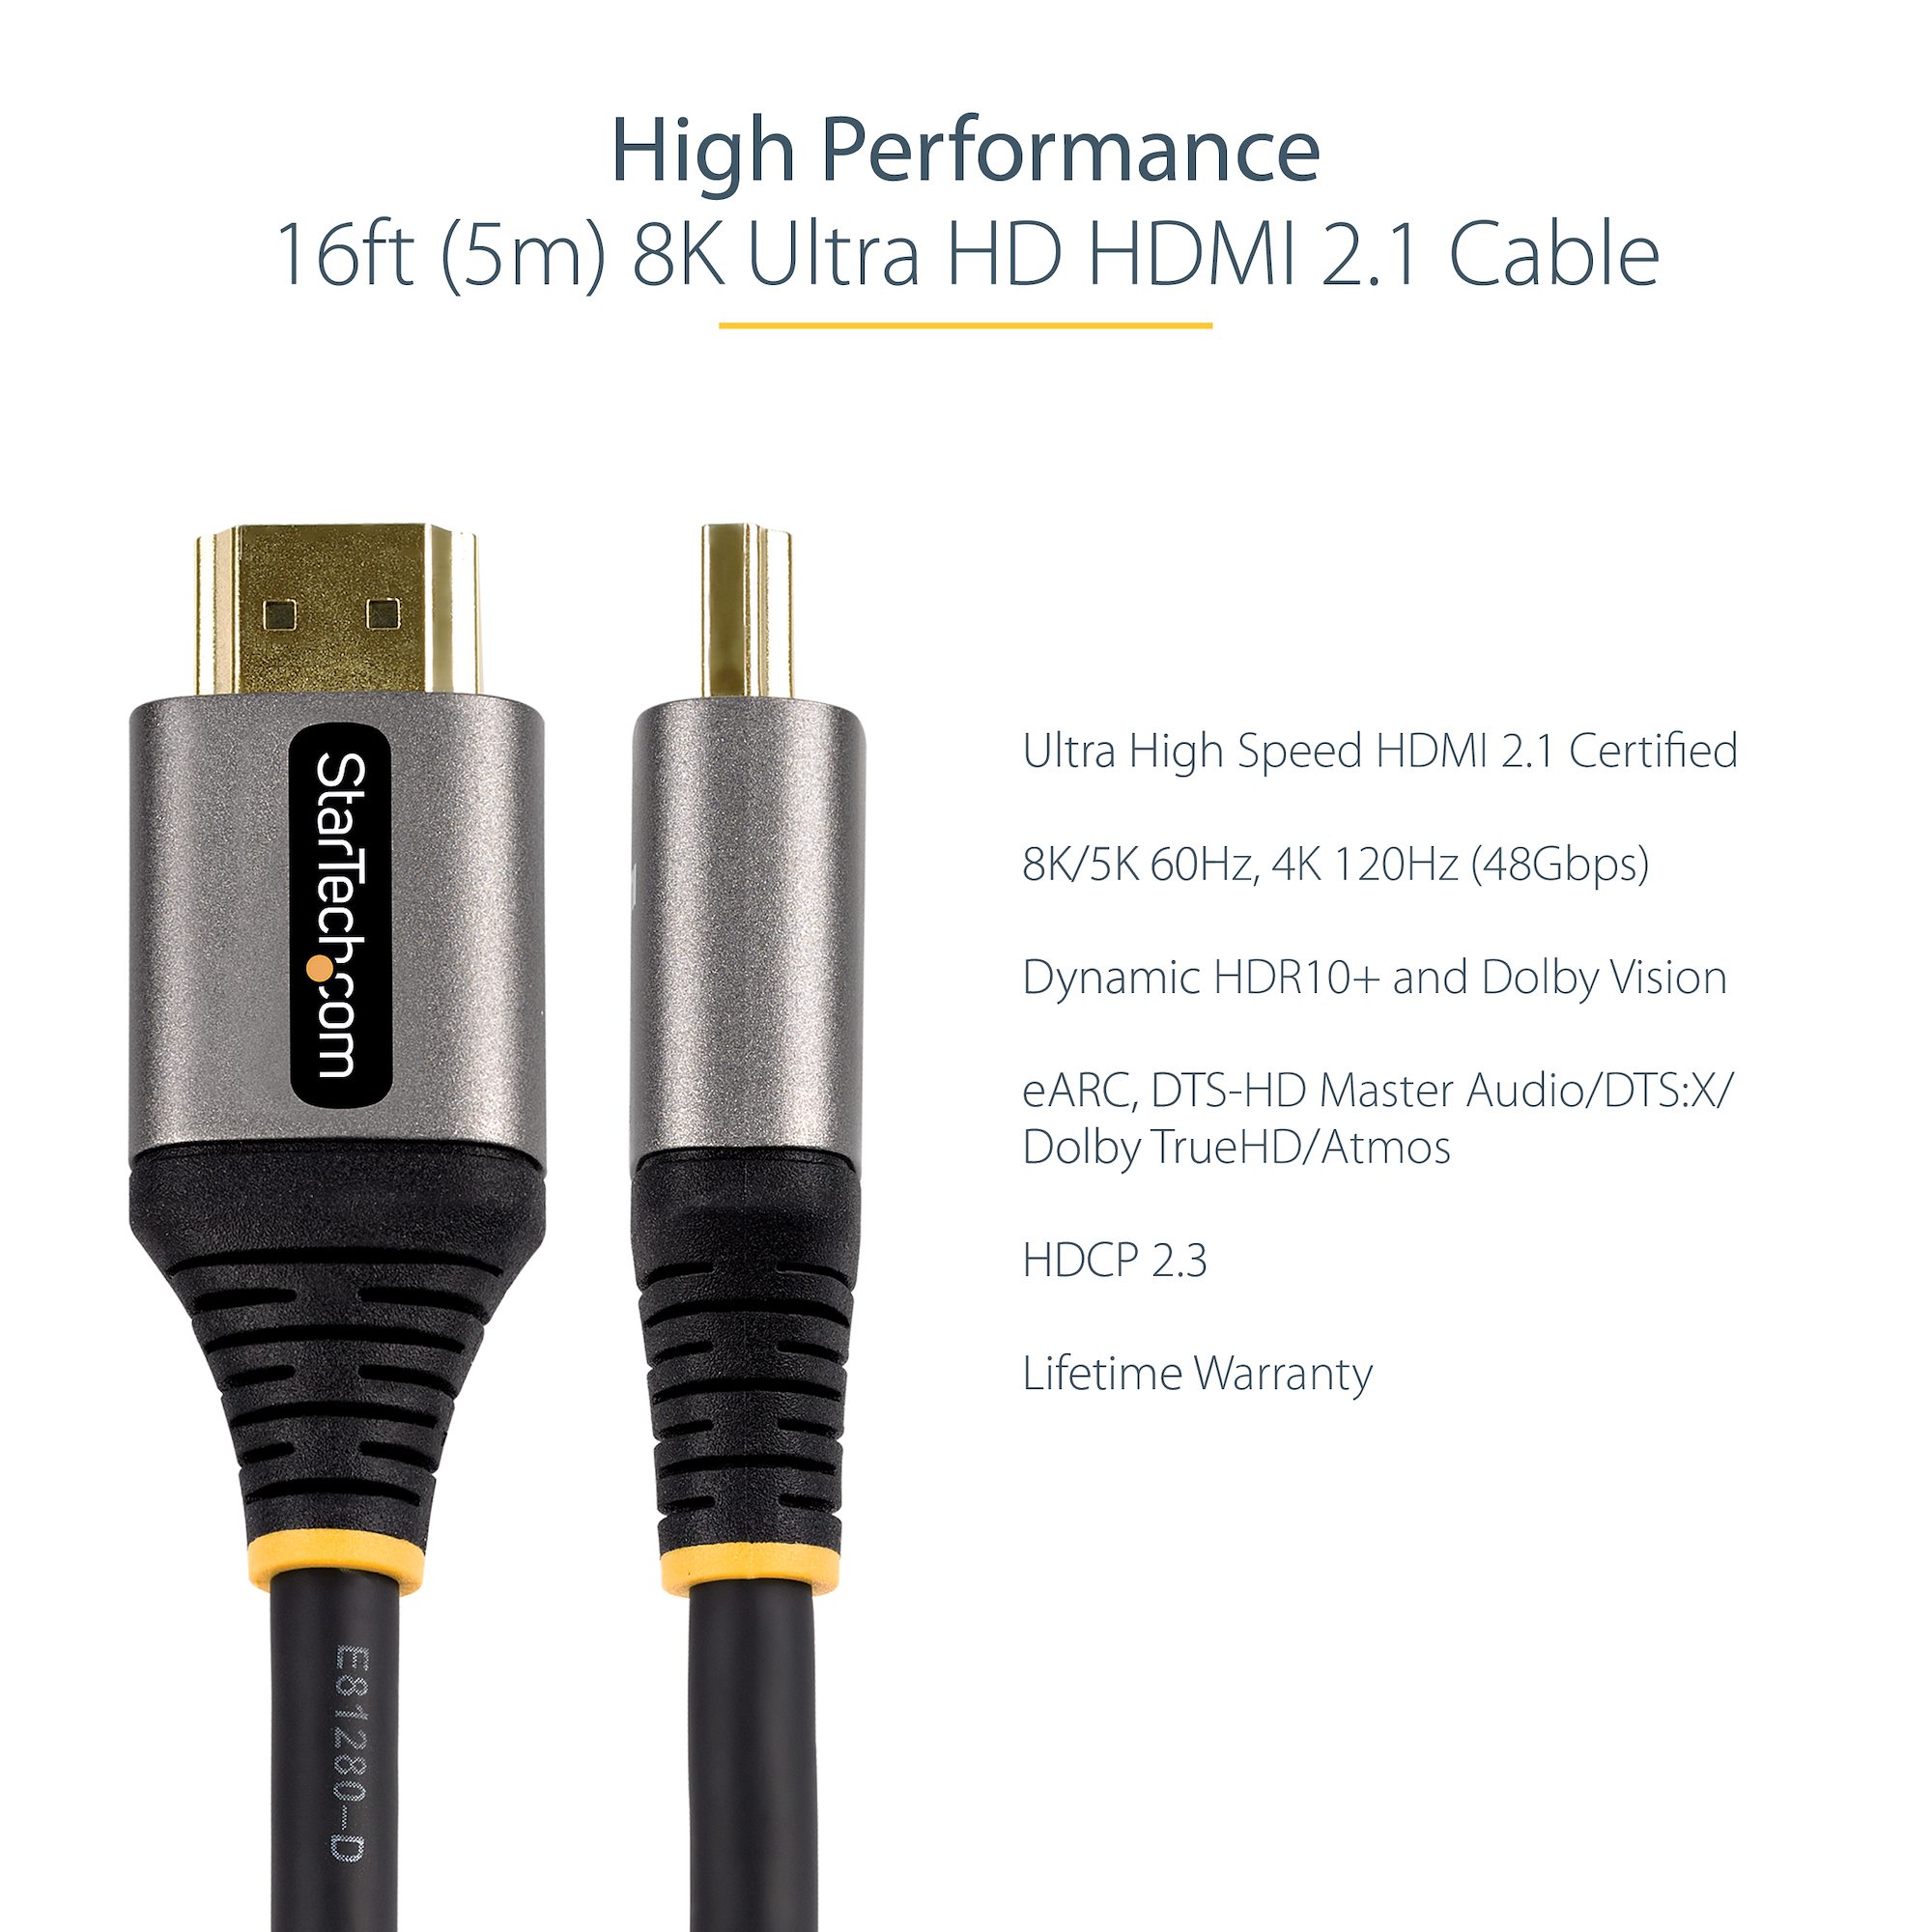 Startech .com 12ft (4m) HDMI 2.1 Cable, Certified Ultra High Speed HDMI  Cable 48Gbps, 8K 60Hz HDR10+, 8K HDMI Cord, TV/Monitor/Display4m/12f  HDMM21V4M - Corporate Armor